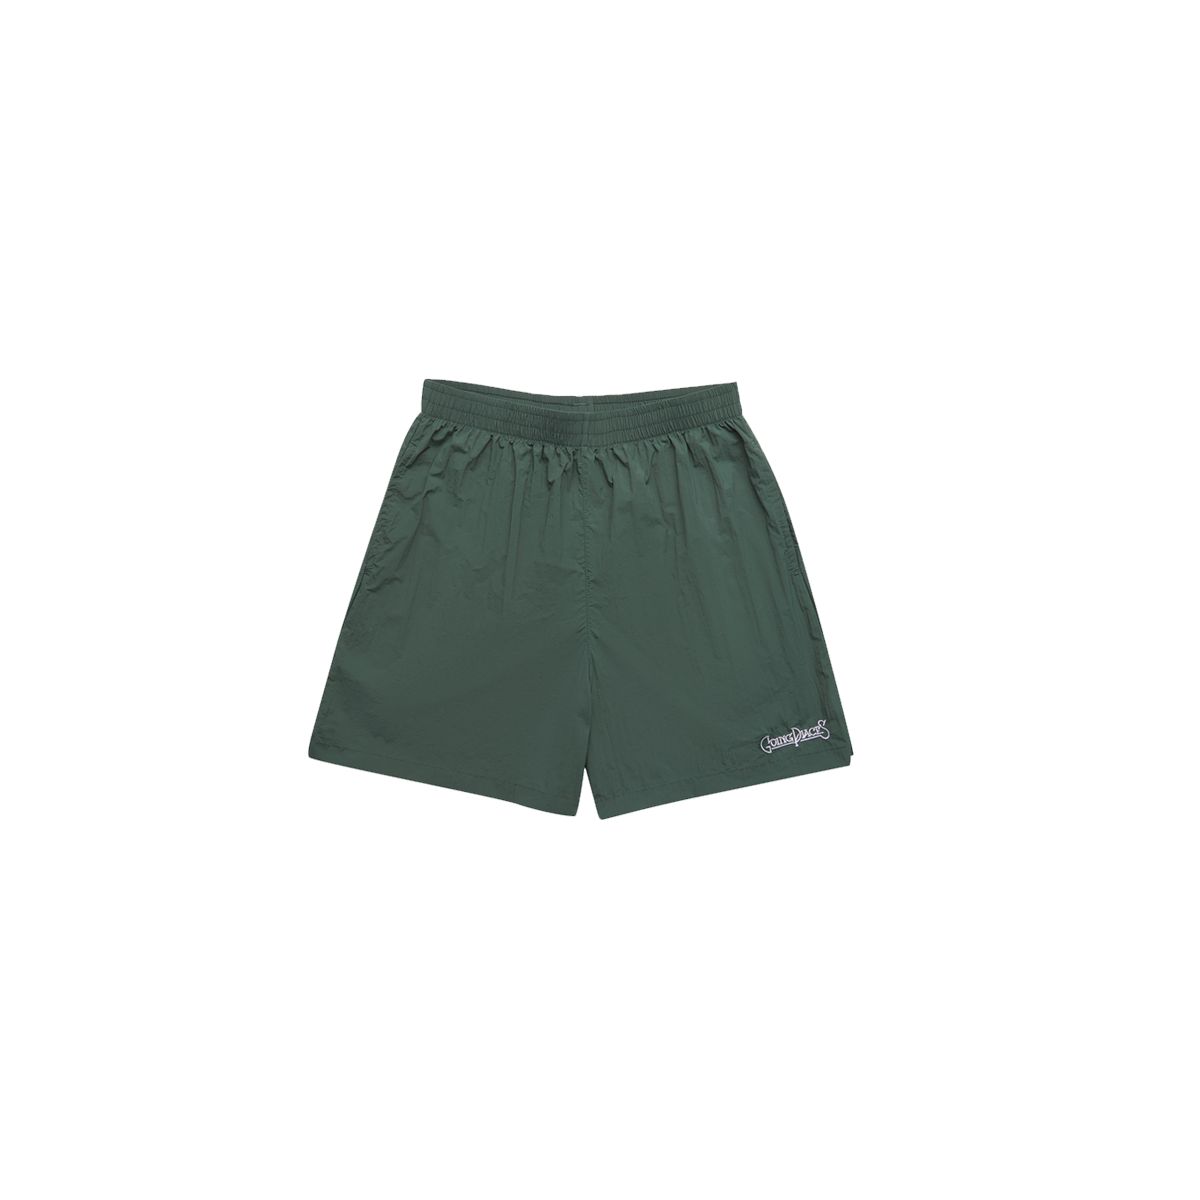 Going Places Nylon 5 Inch Short -Sneakerbox TLV